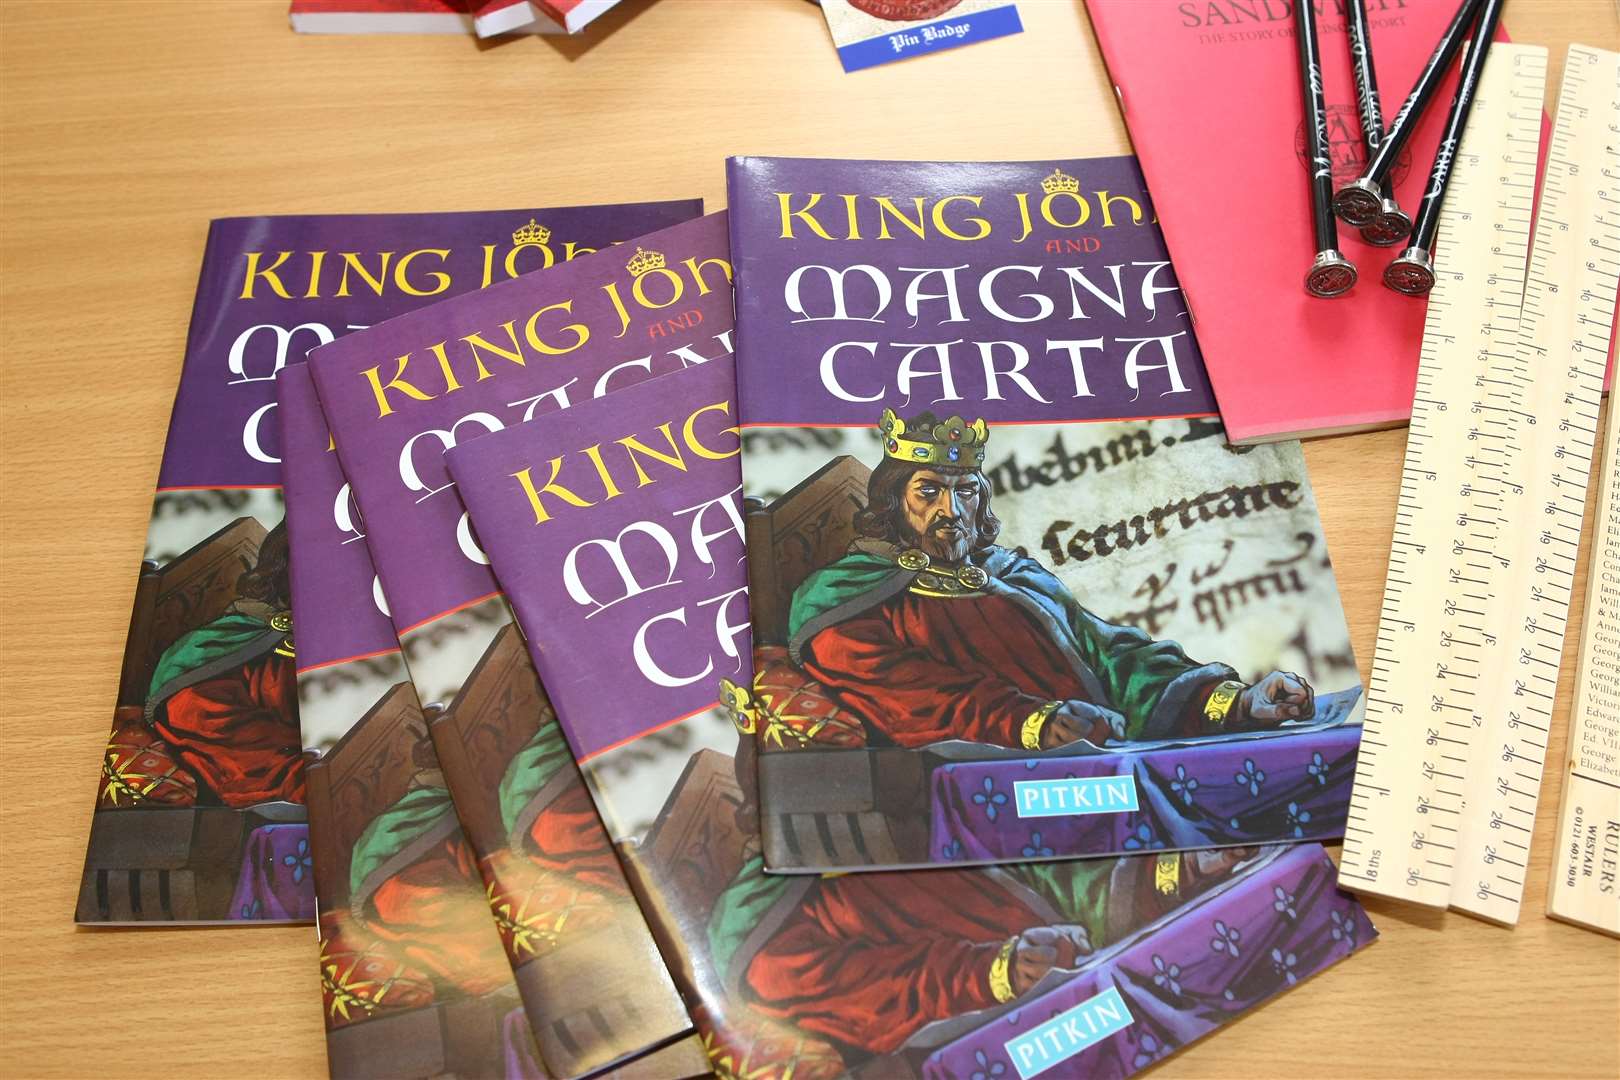 Merchandise for the Magna Carta